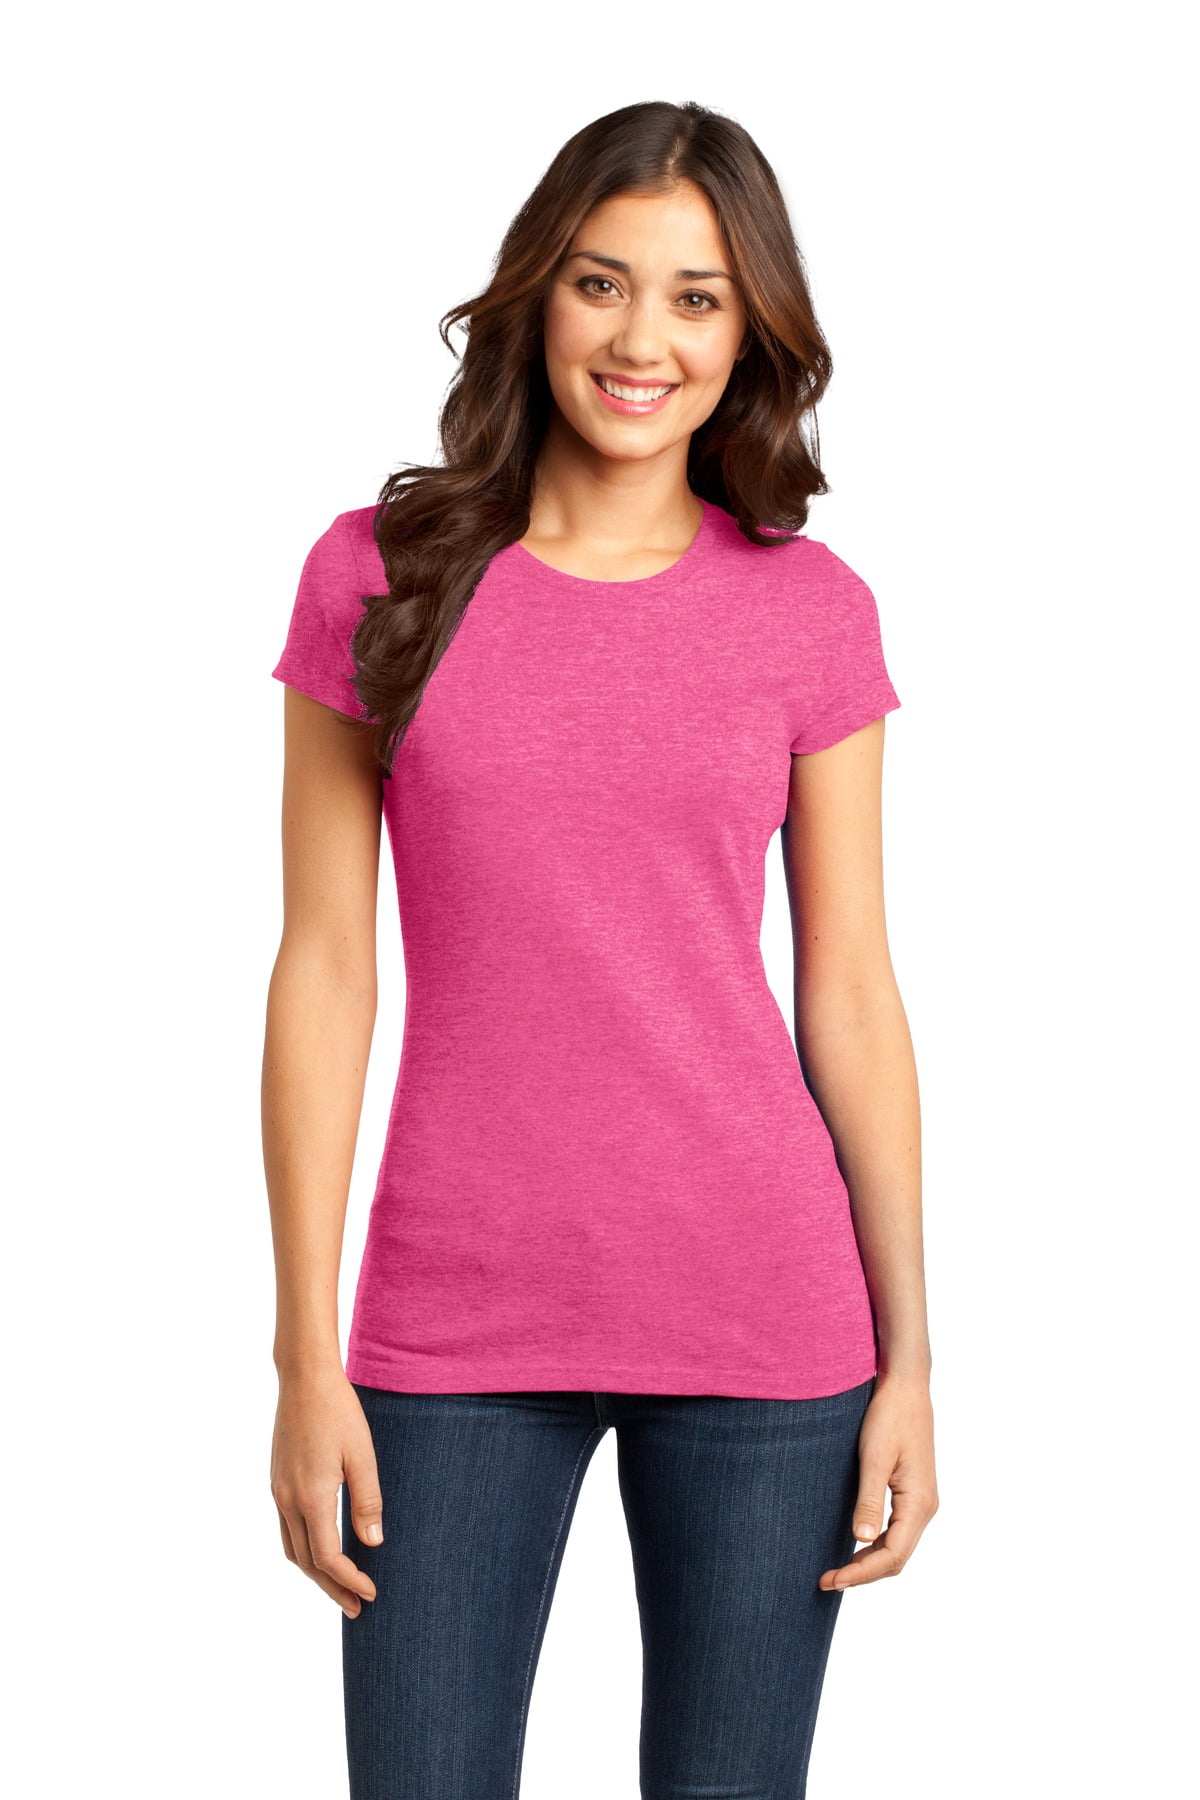 District DT6001 Juniors Very Important Tee , Fuchsia Frost, M